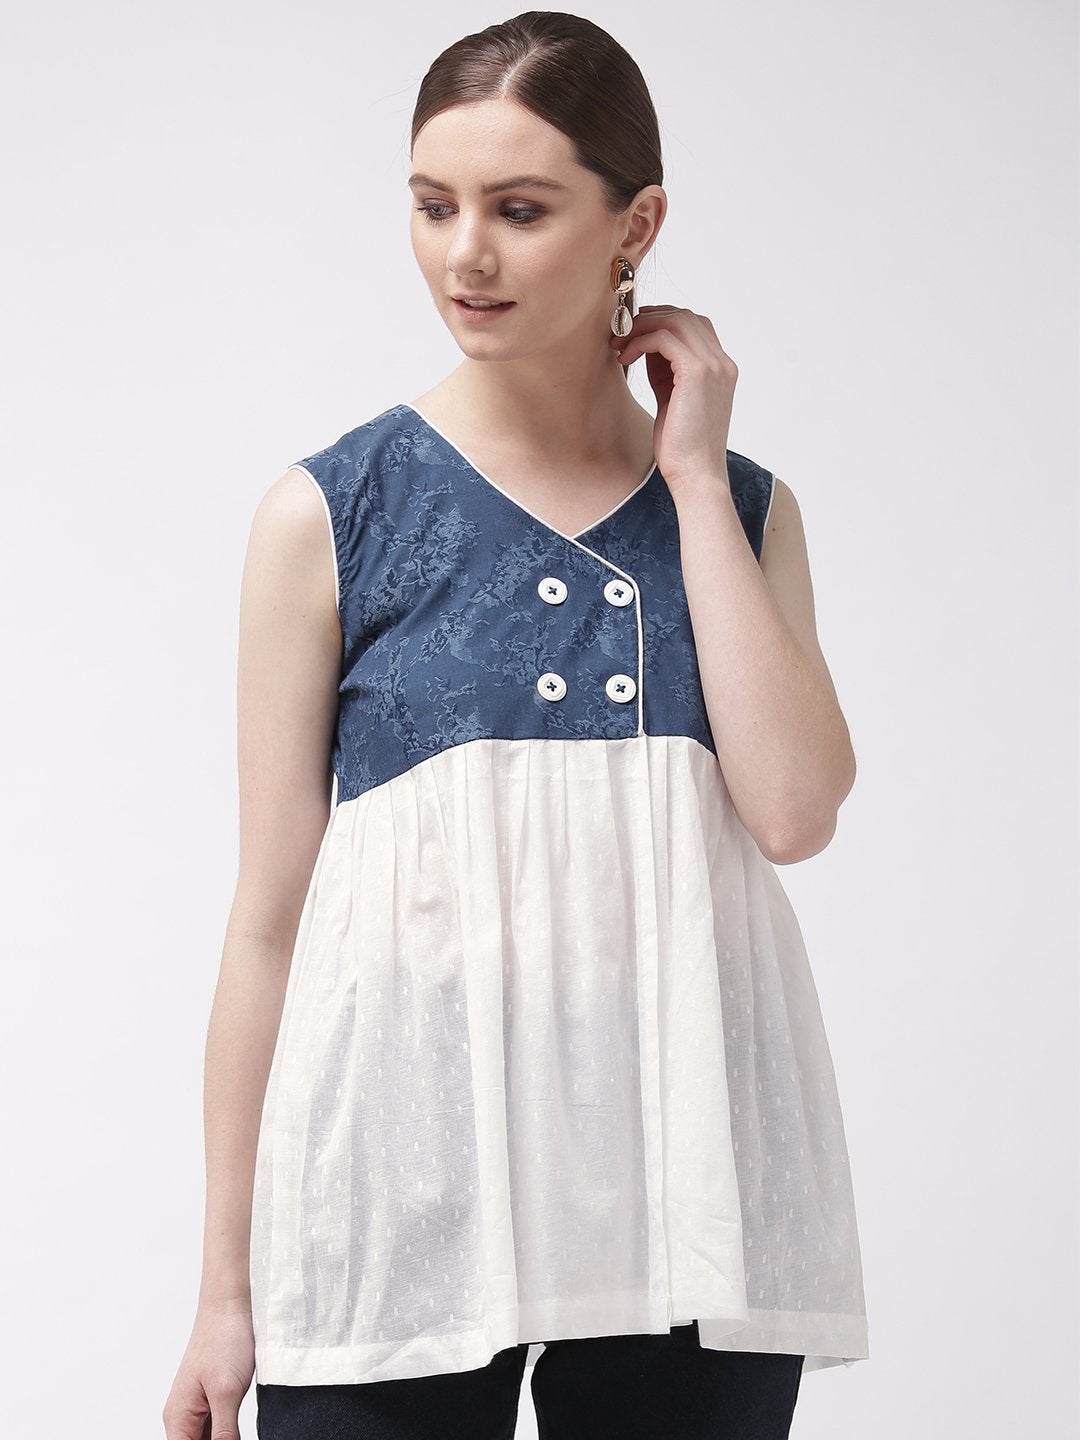 Women's Denim Blue & White Top With Buttons - InWeave